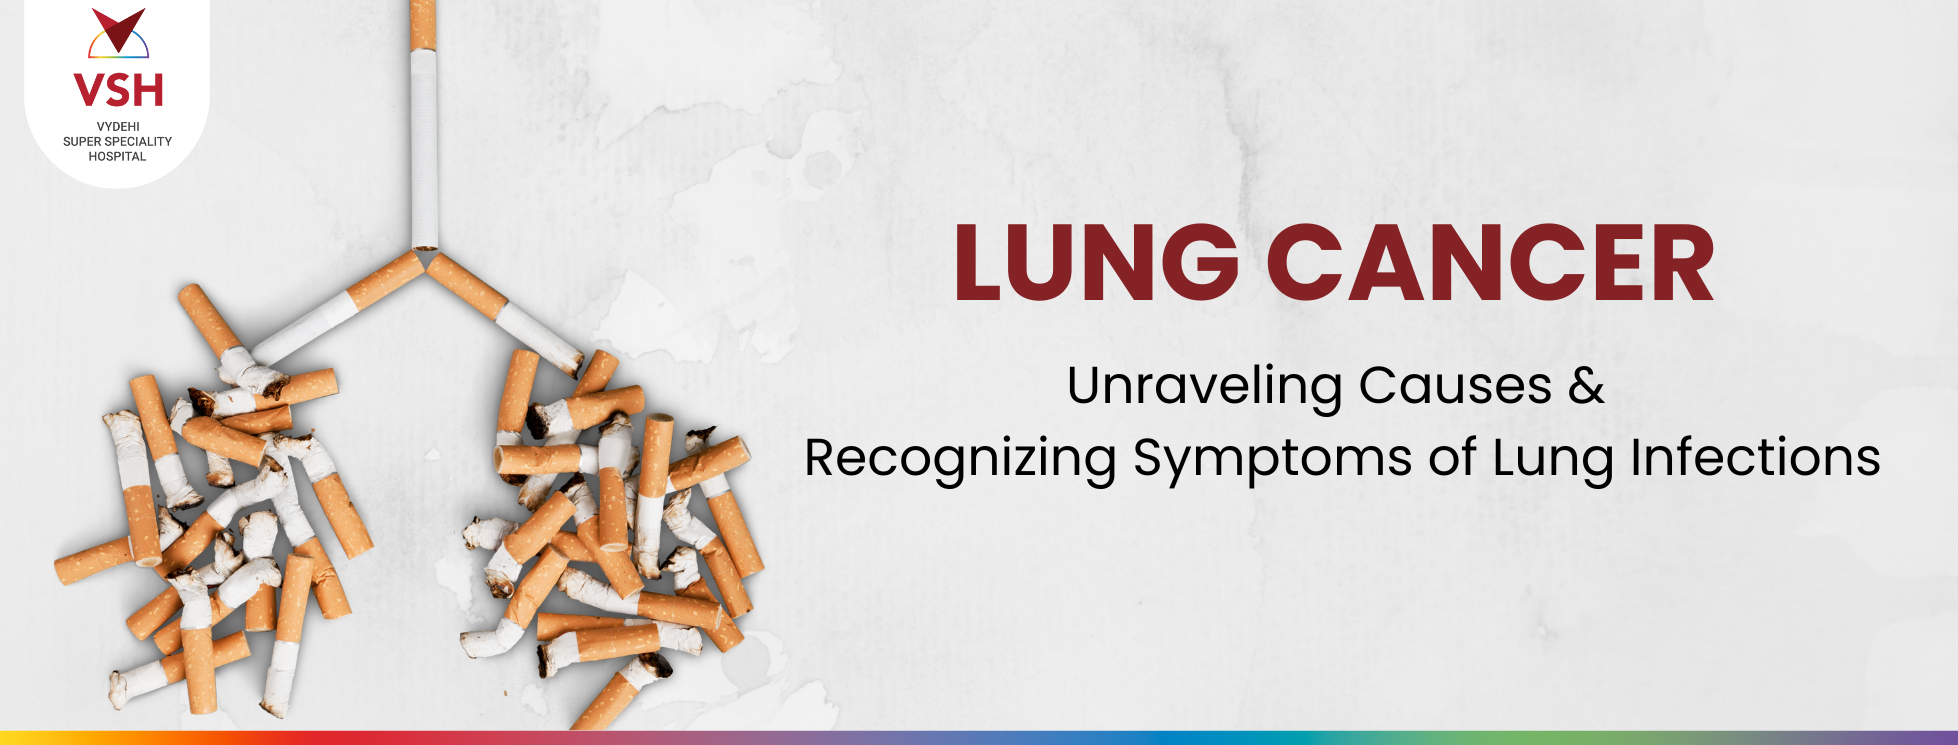 Lung Cancer: Unraveling Causes and Recognizing Symptoms of Lung Infections